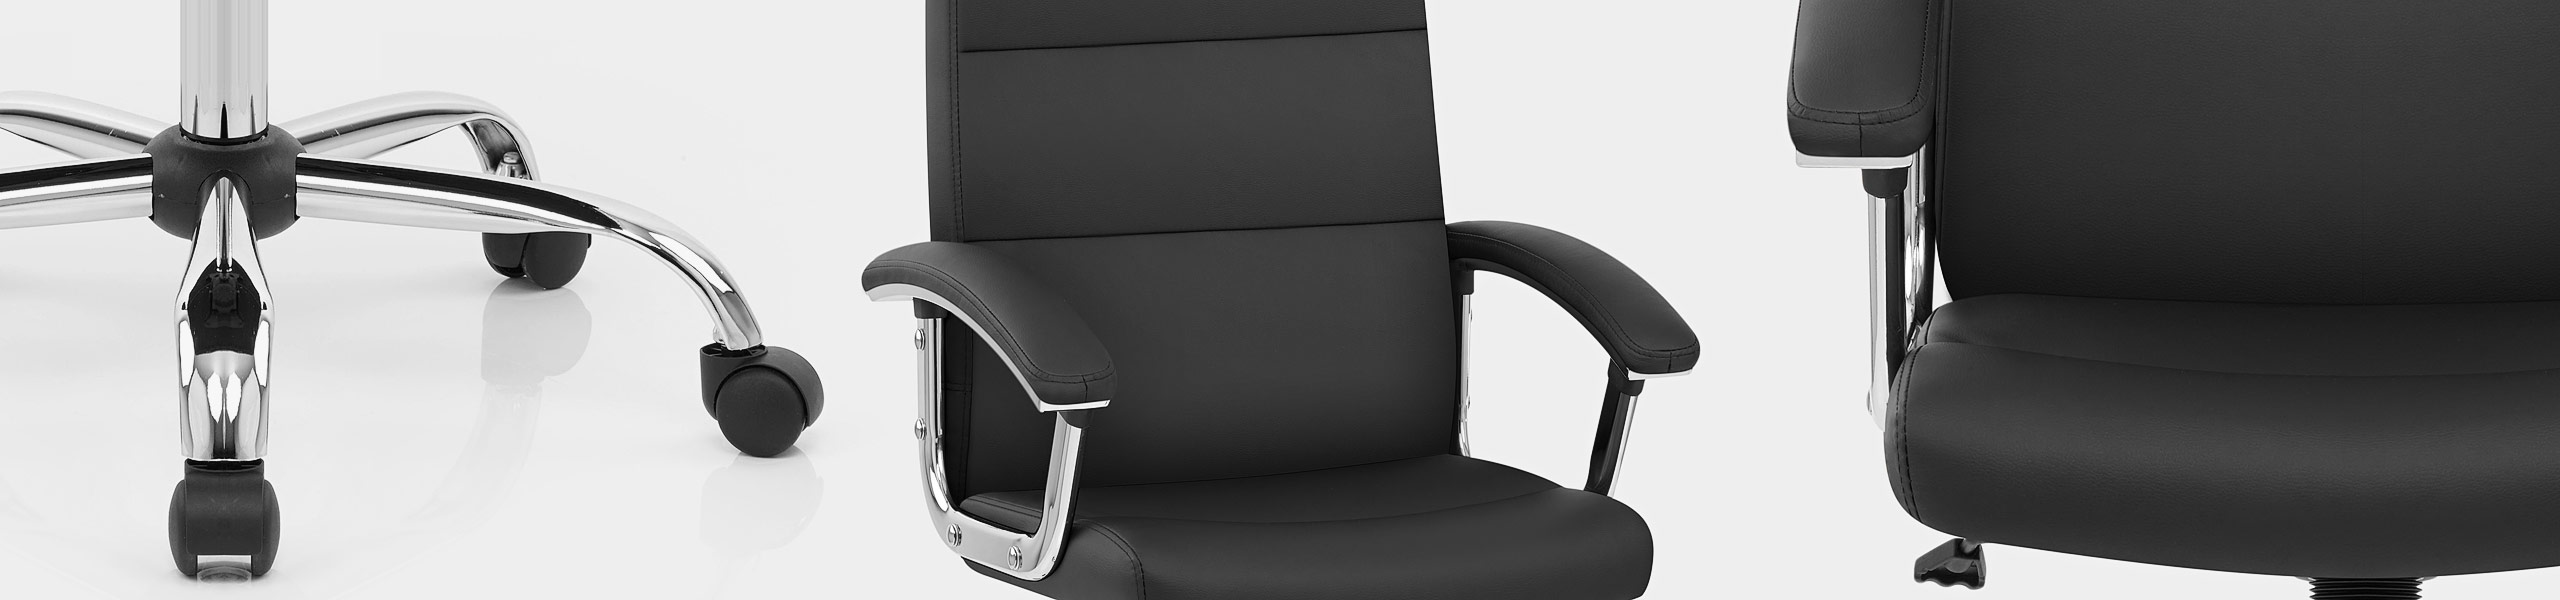 Stanford Office Chair Black Video Banner